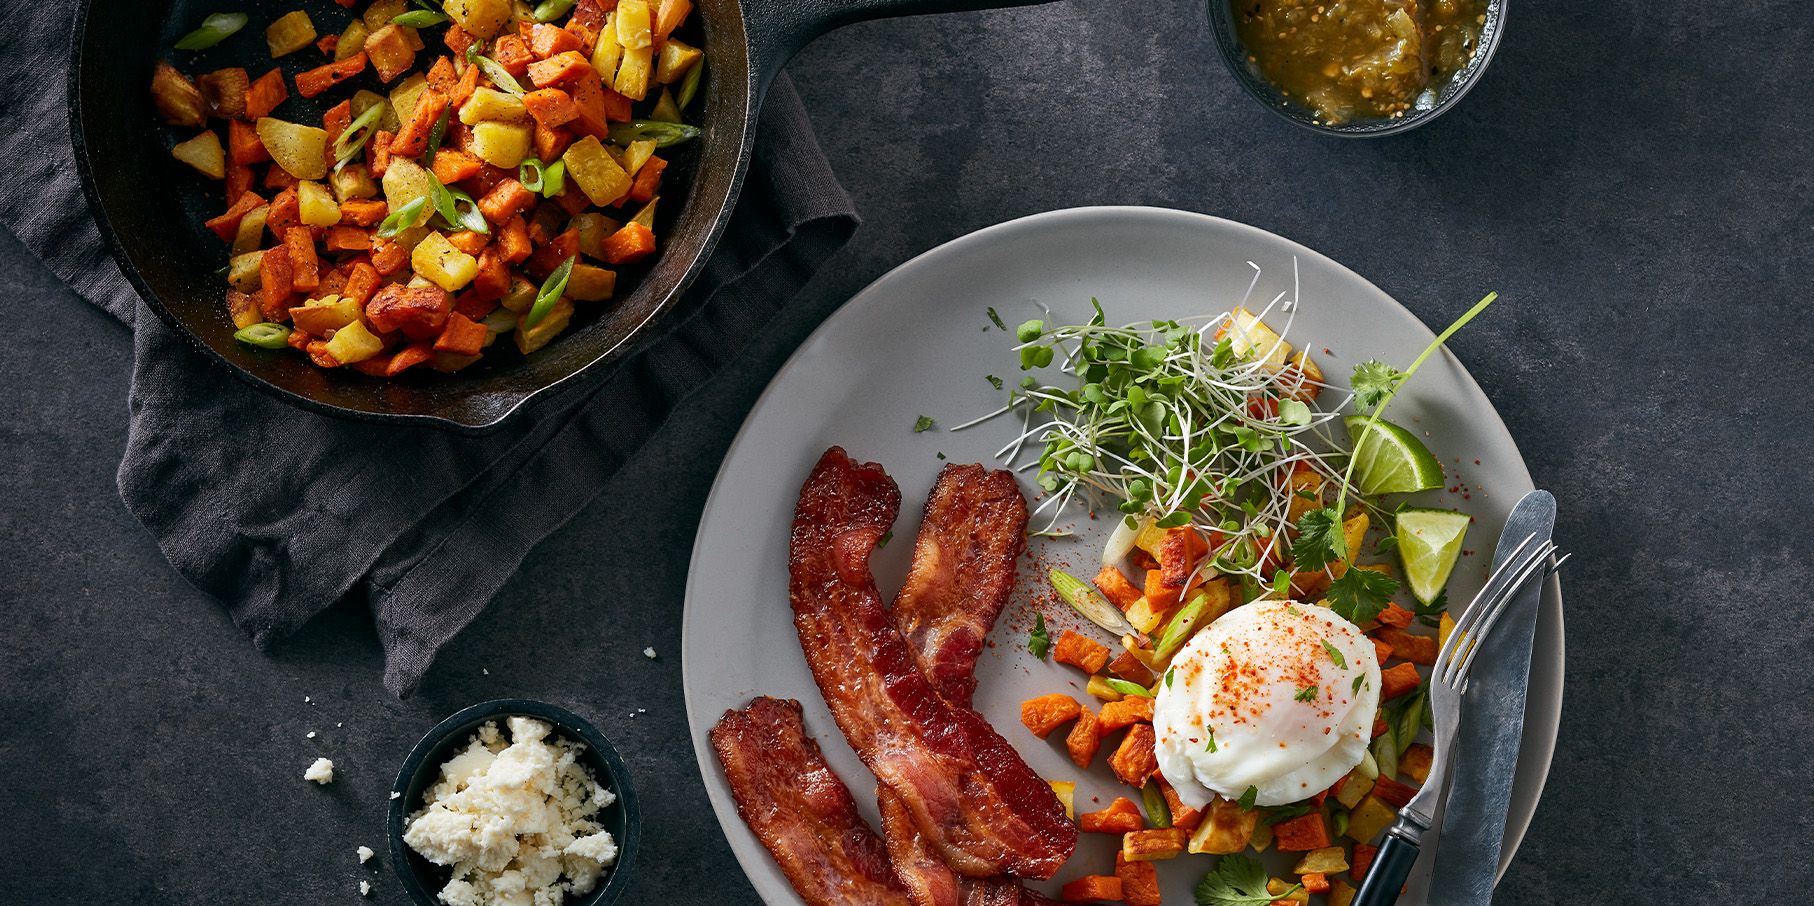 Overhead shot of bacon, egg and veggies on a gray plate